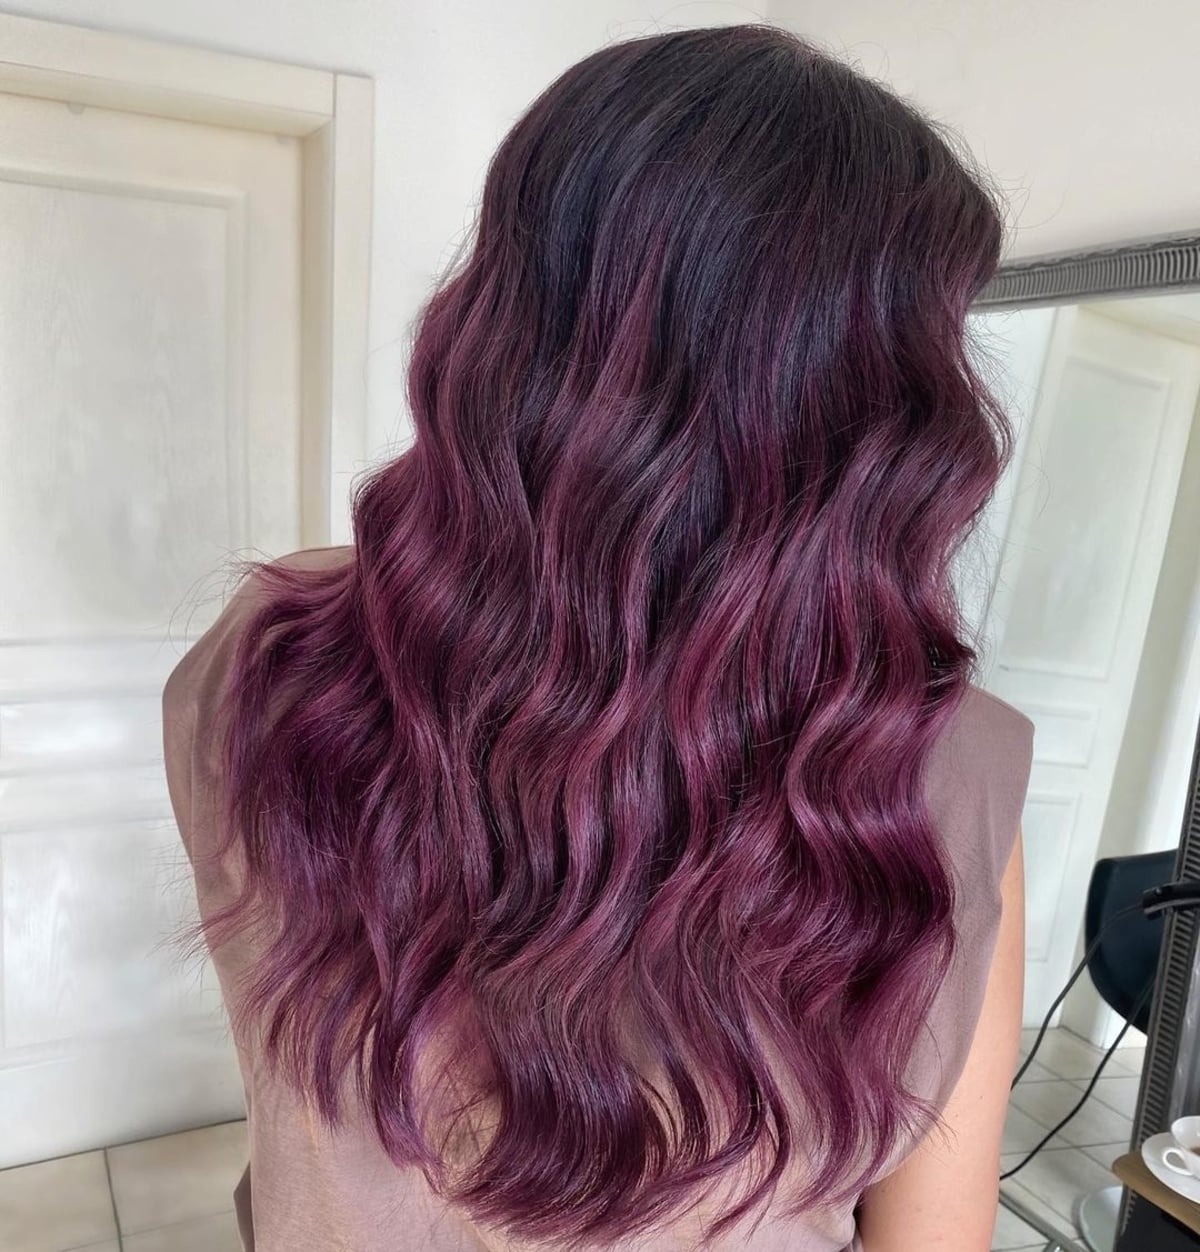 24 Jaw-Dropping Dark Burgundy Hair Colors You Have to See